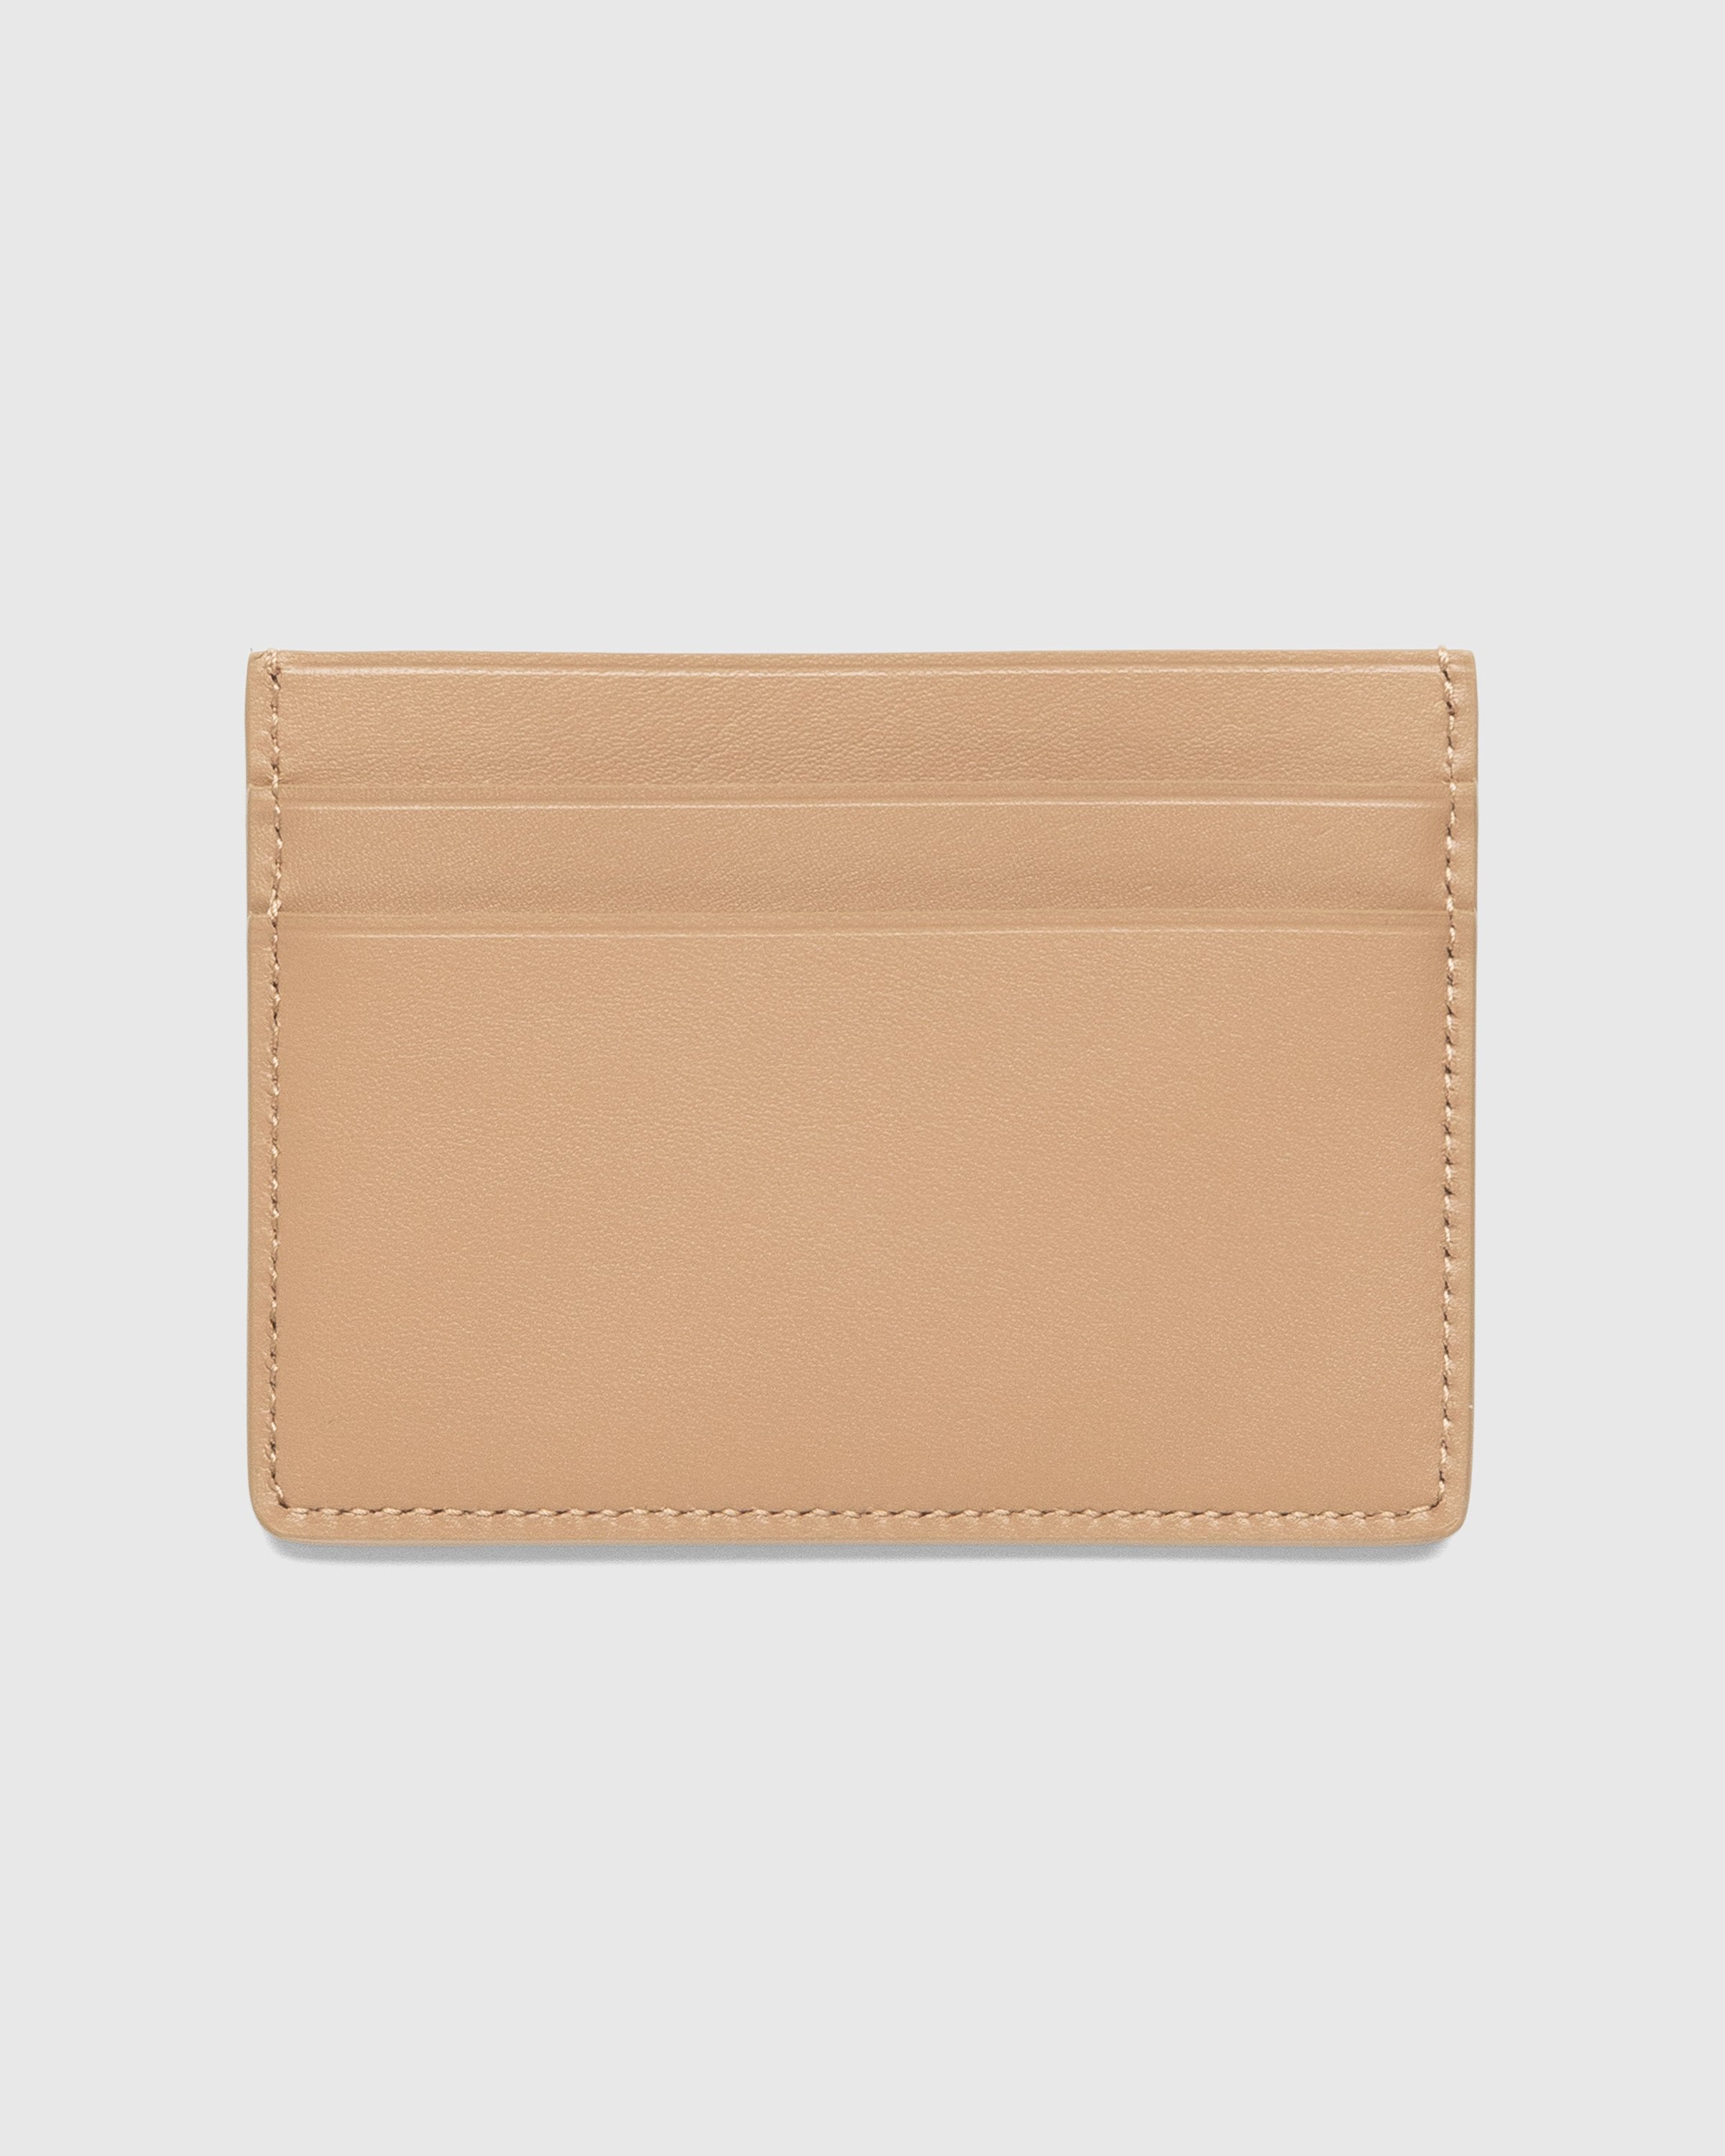 Jil Sander - Leather Card Holder Clay - Accessories - Grey - Image 2